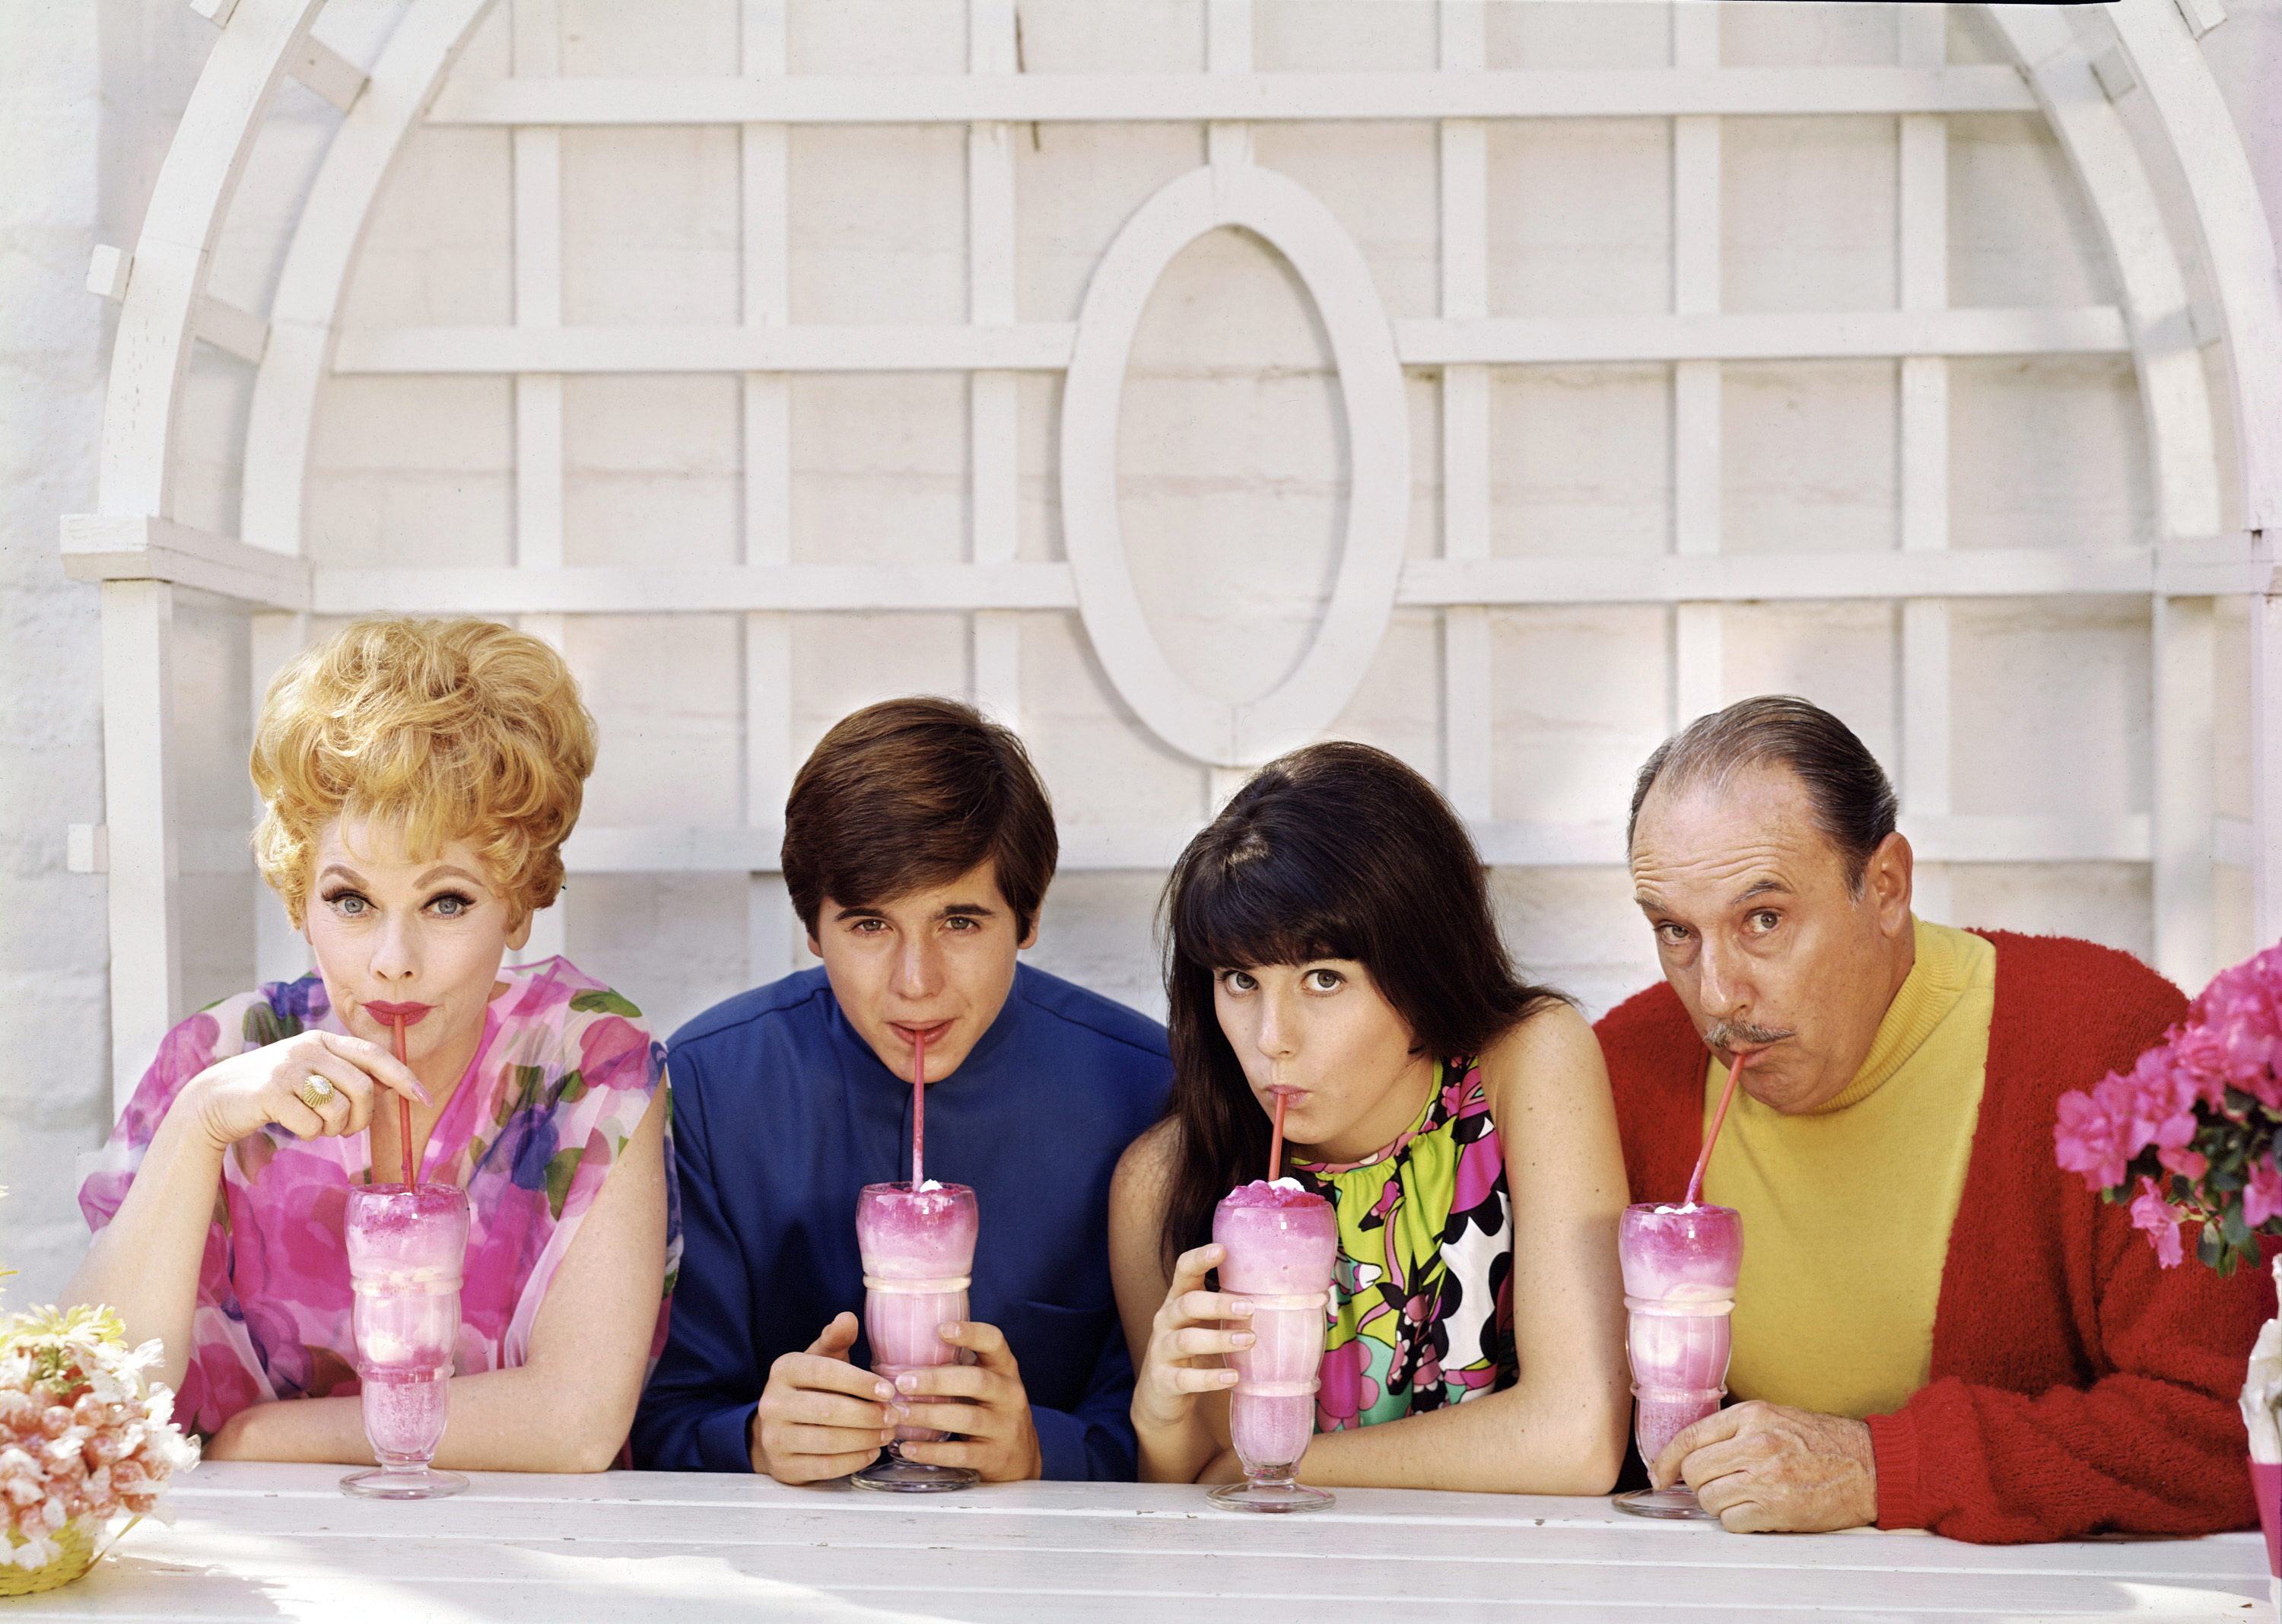 Lucille Ball, Desi Arnaz Jr., Lucie Arnaz, and Gale Gordon on "Here's Lucy" in 1969 | Source: Getty Images